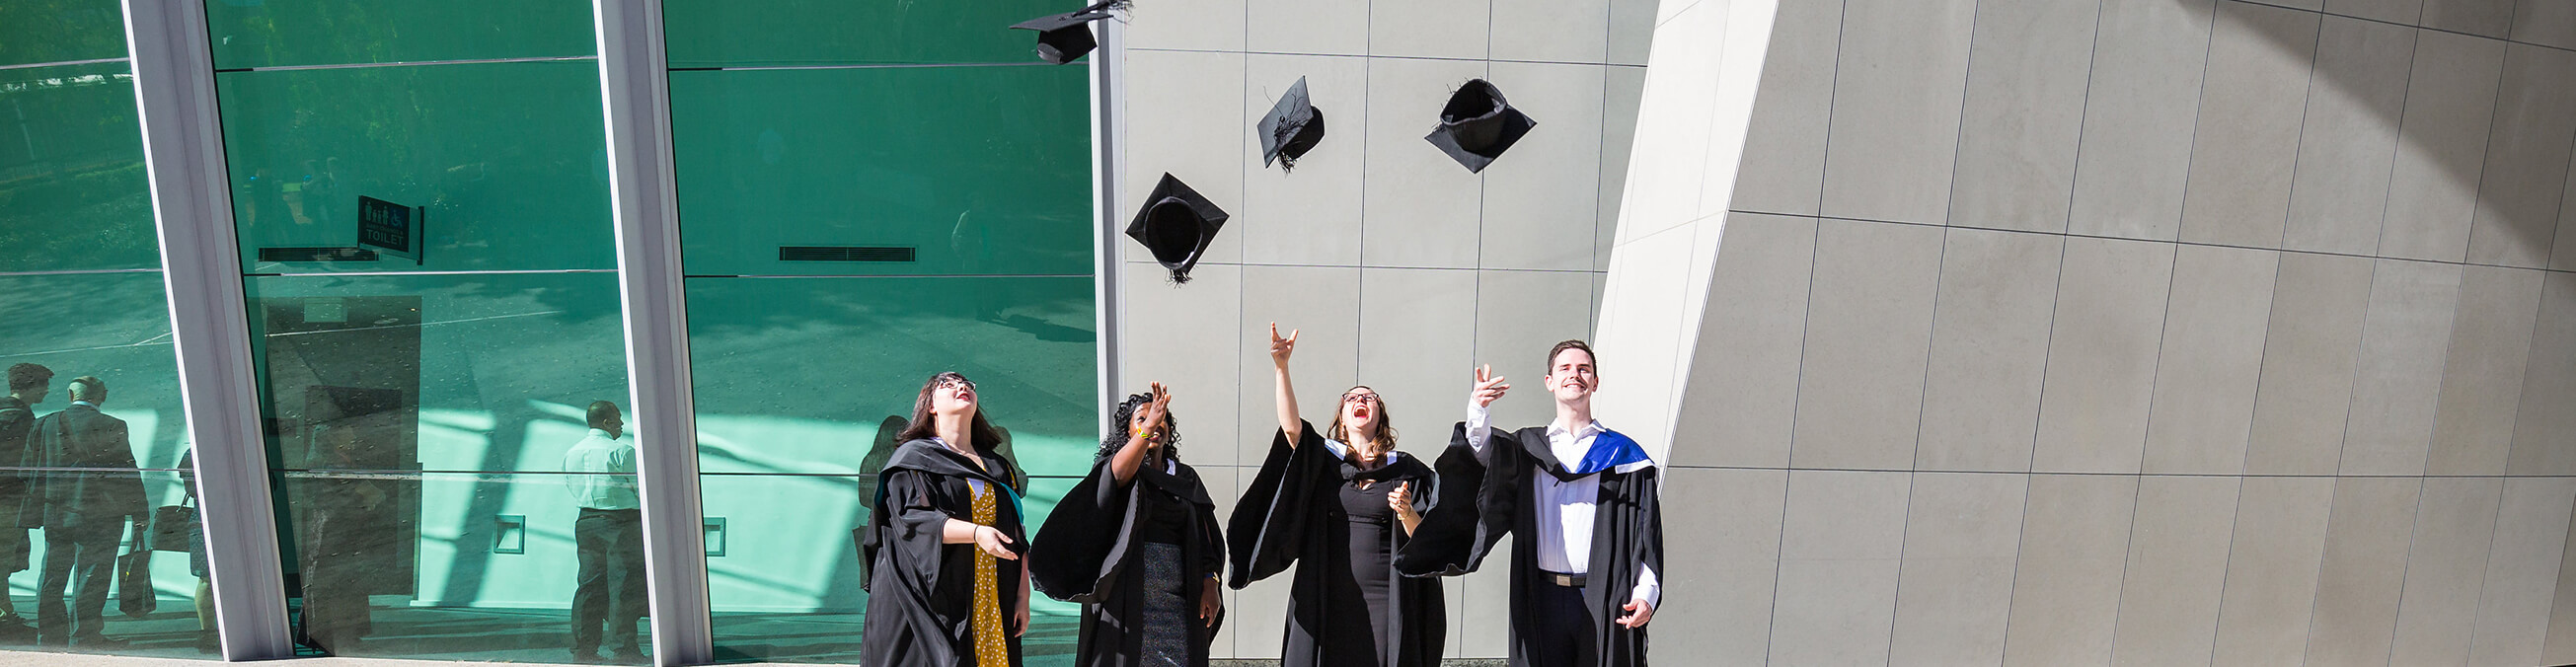 Four students wearing full regalia, throwing their mortar board hats in the air